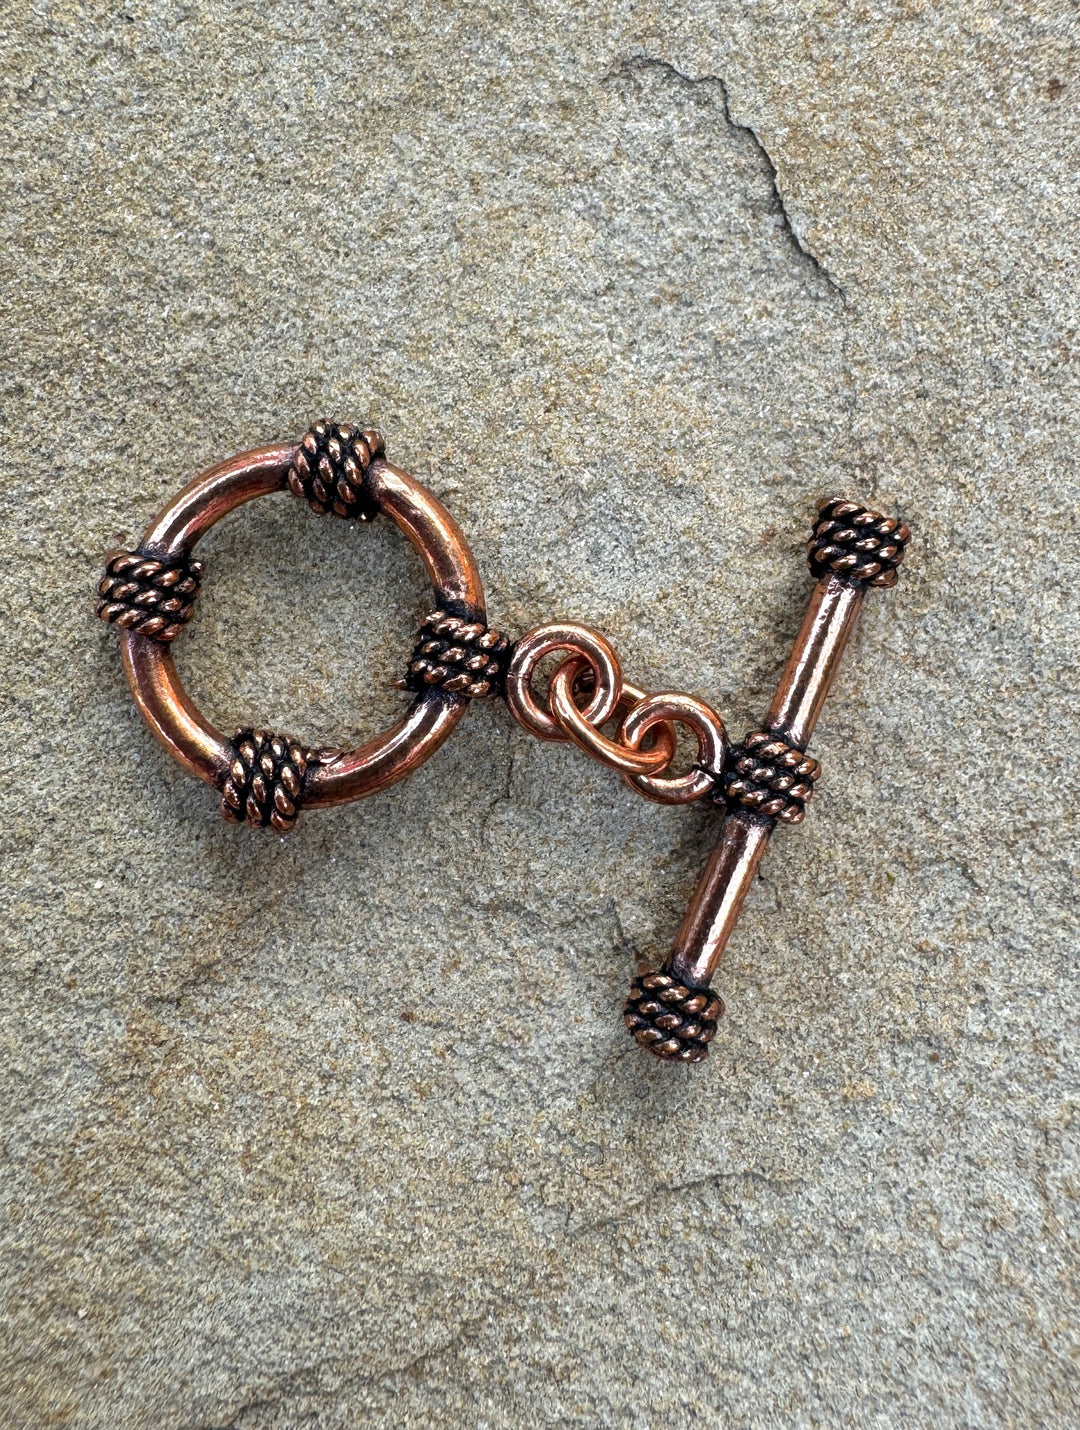 Oxidized Copper Toggle Clasp (Pkg of 1 Set) - Findings